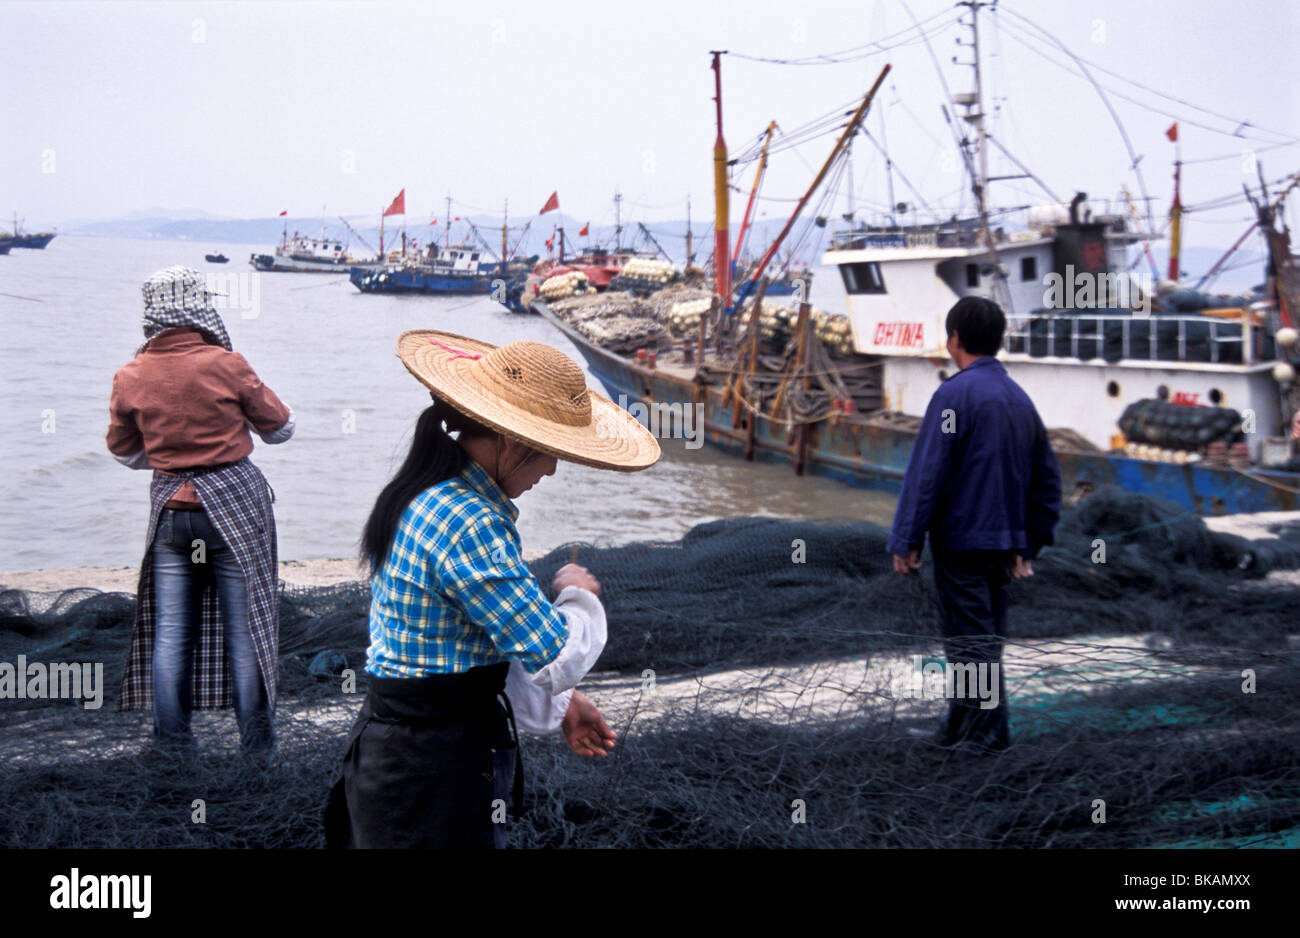 Villagers repair nets in the harbour of Jin Shan Island, China Stock Photo  - Alamy